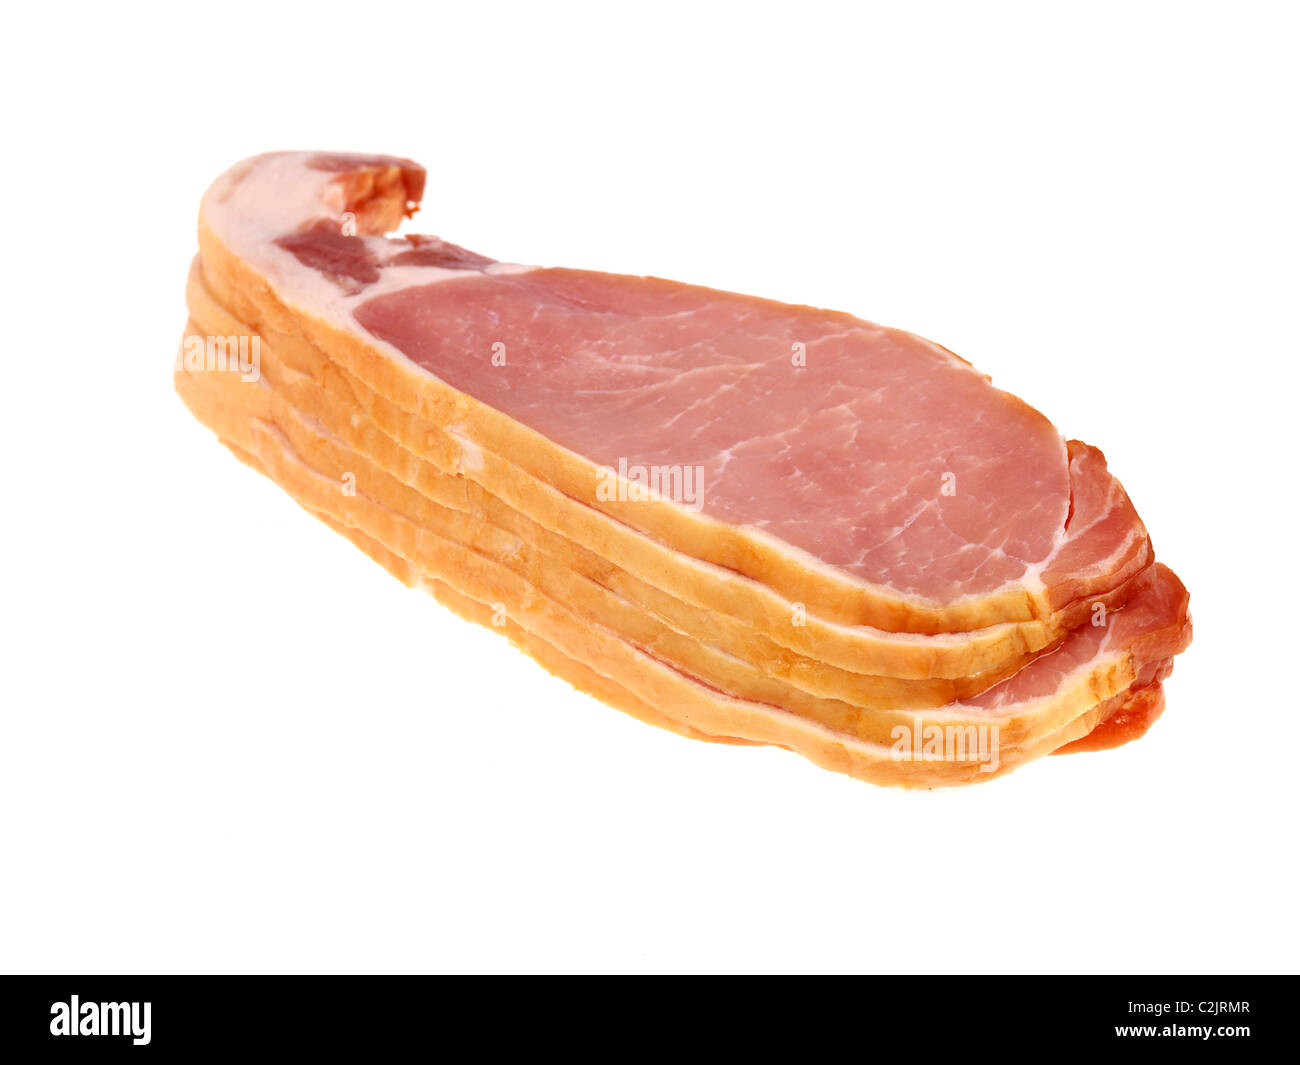 Pile Or Stack Of Uncooked Fresh Raw Smoked Back Bacon Against A White Background With No People And A Clipping Path Ready To Cook Stock Photo